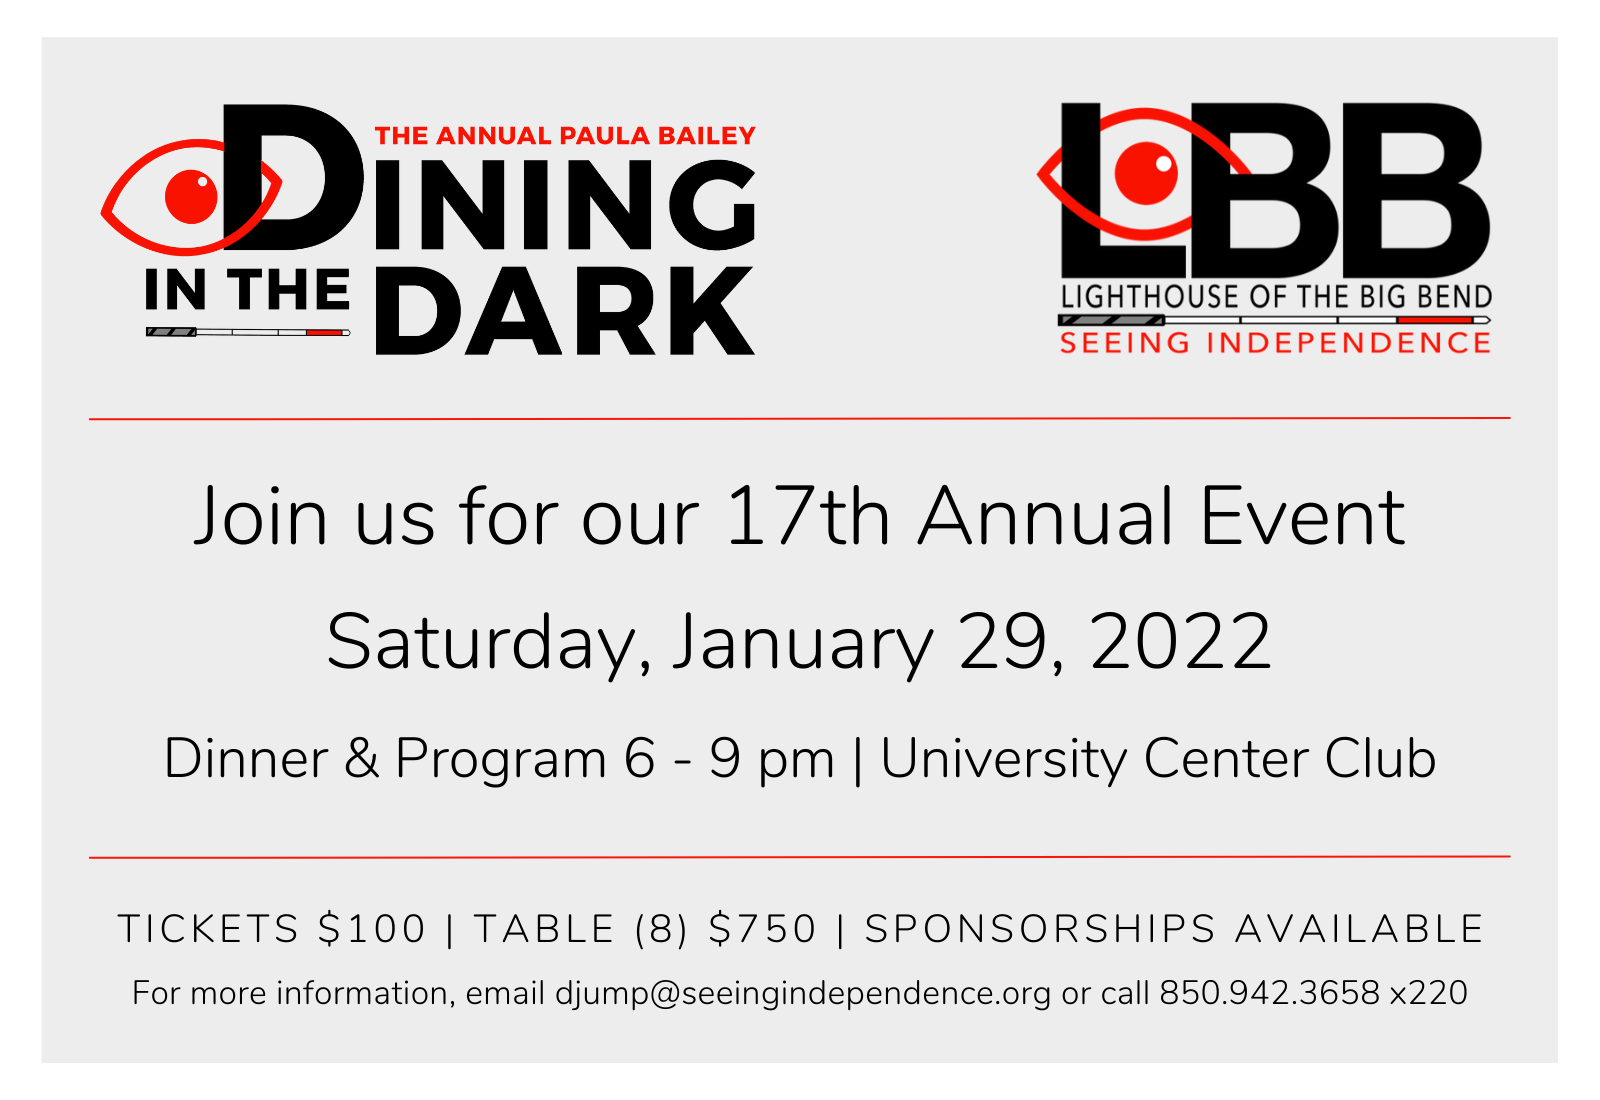 The Annual Paula Bailey Dining in the Dark LBB Lighthouse of the Big Bend Seeing Independence Joins us for our 17th Annual Event Saturday, January 28, 2022 Dinner & Program 6 - 9 pm University Center Club Tickets $100 Table (8) $750 Sponsorships Available For more information email djump@seeingindependence.org or call 850-942-3658 x220